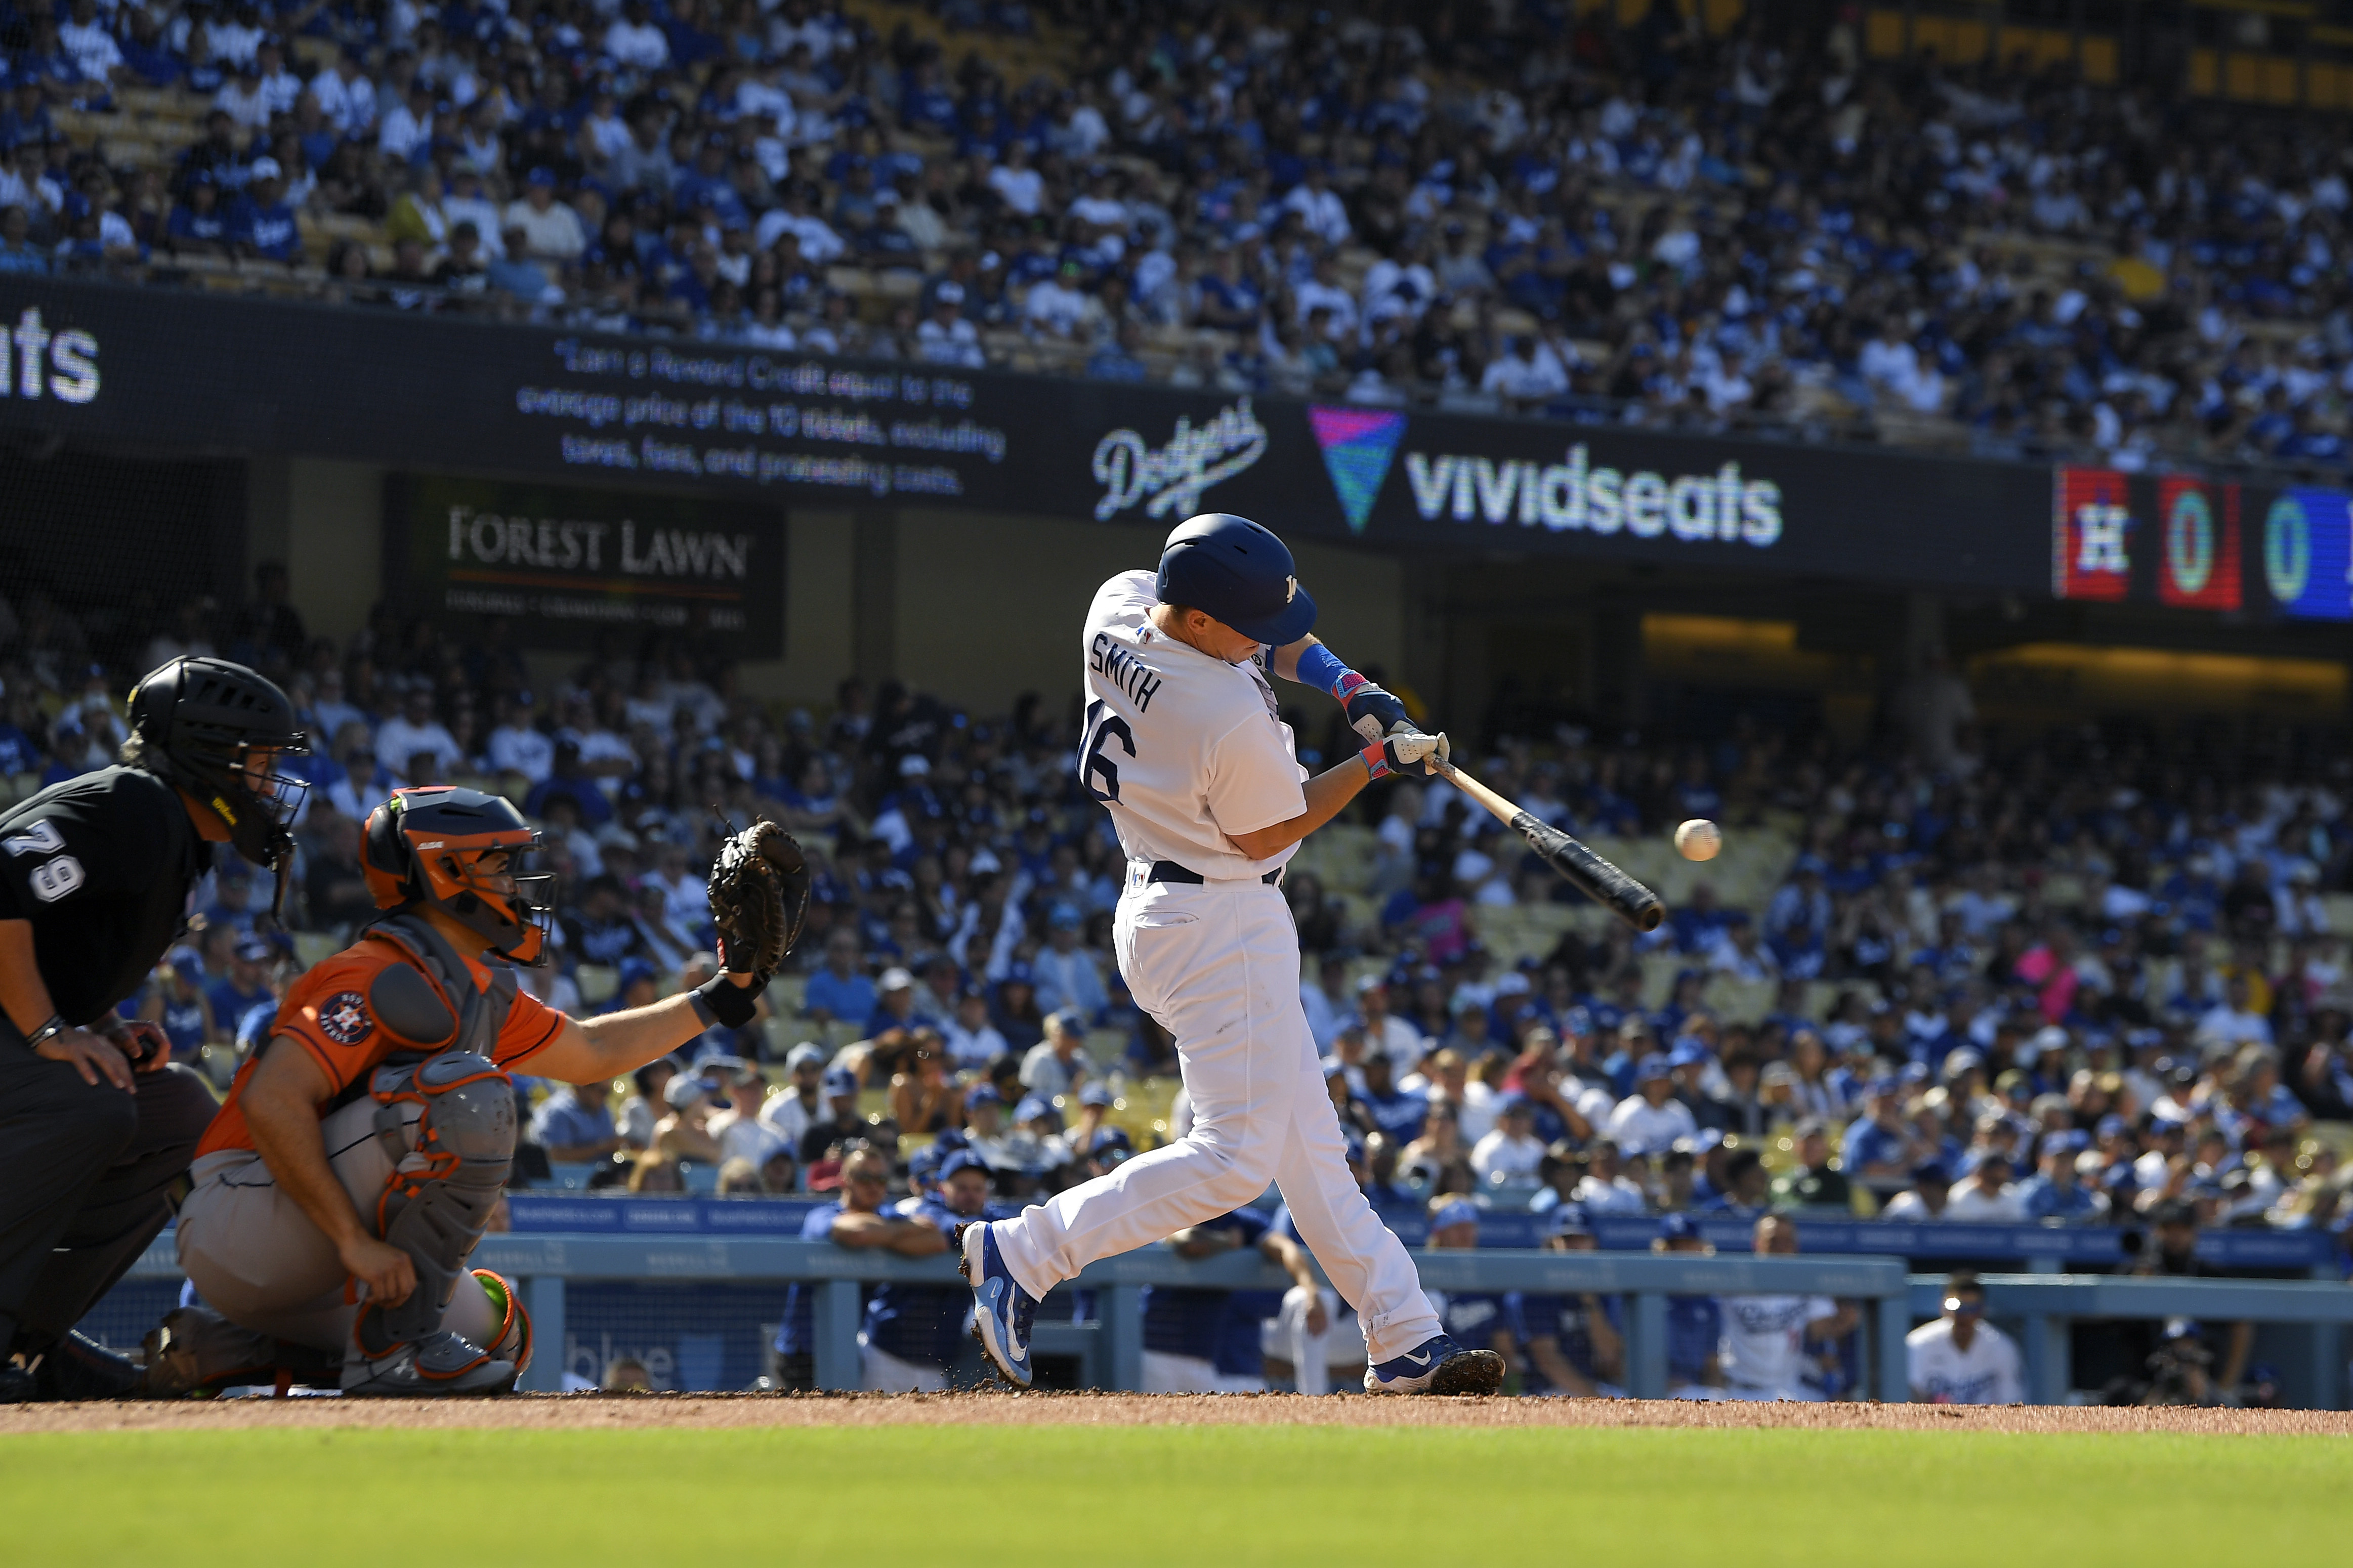 Dodgers hit 4 home runs, including go-ahead drive by Heyward, in 7